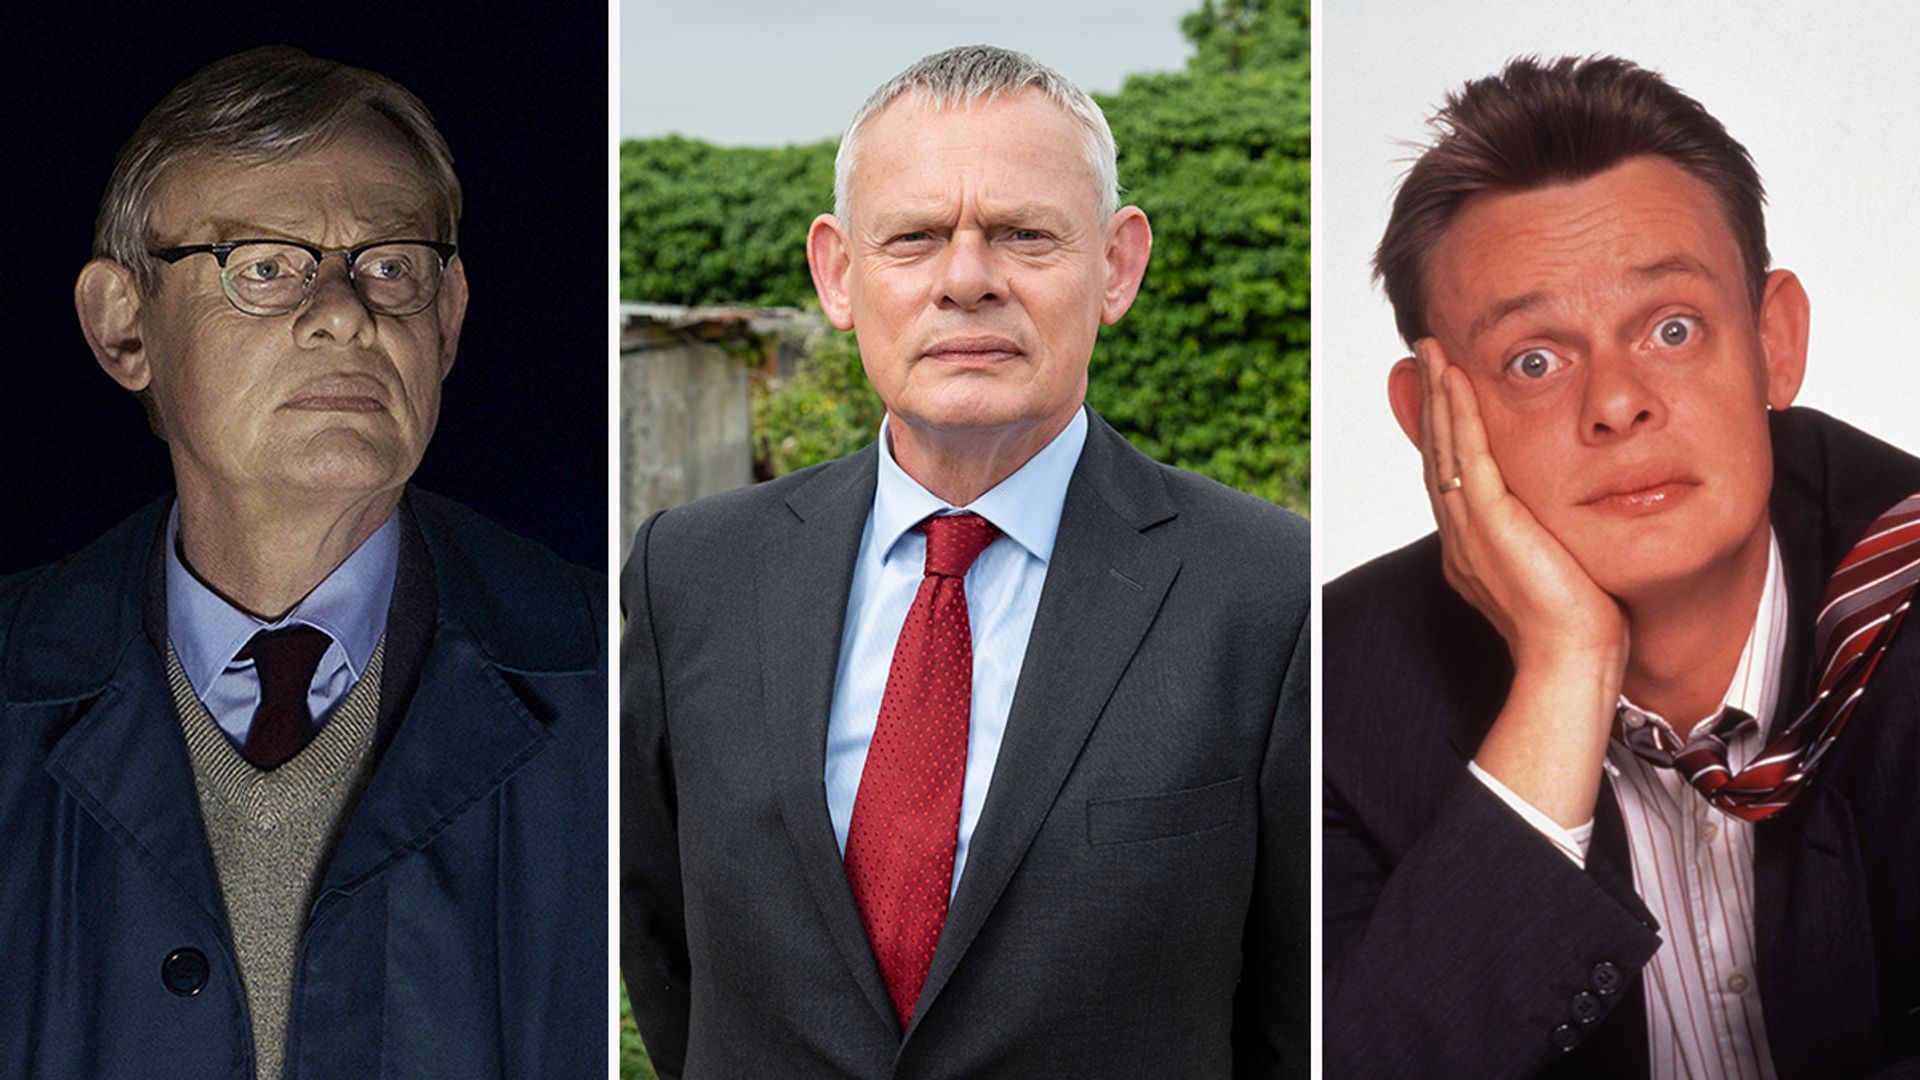 Martin Clunes looked so different at the start of his career – take a look back